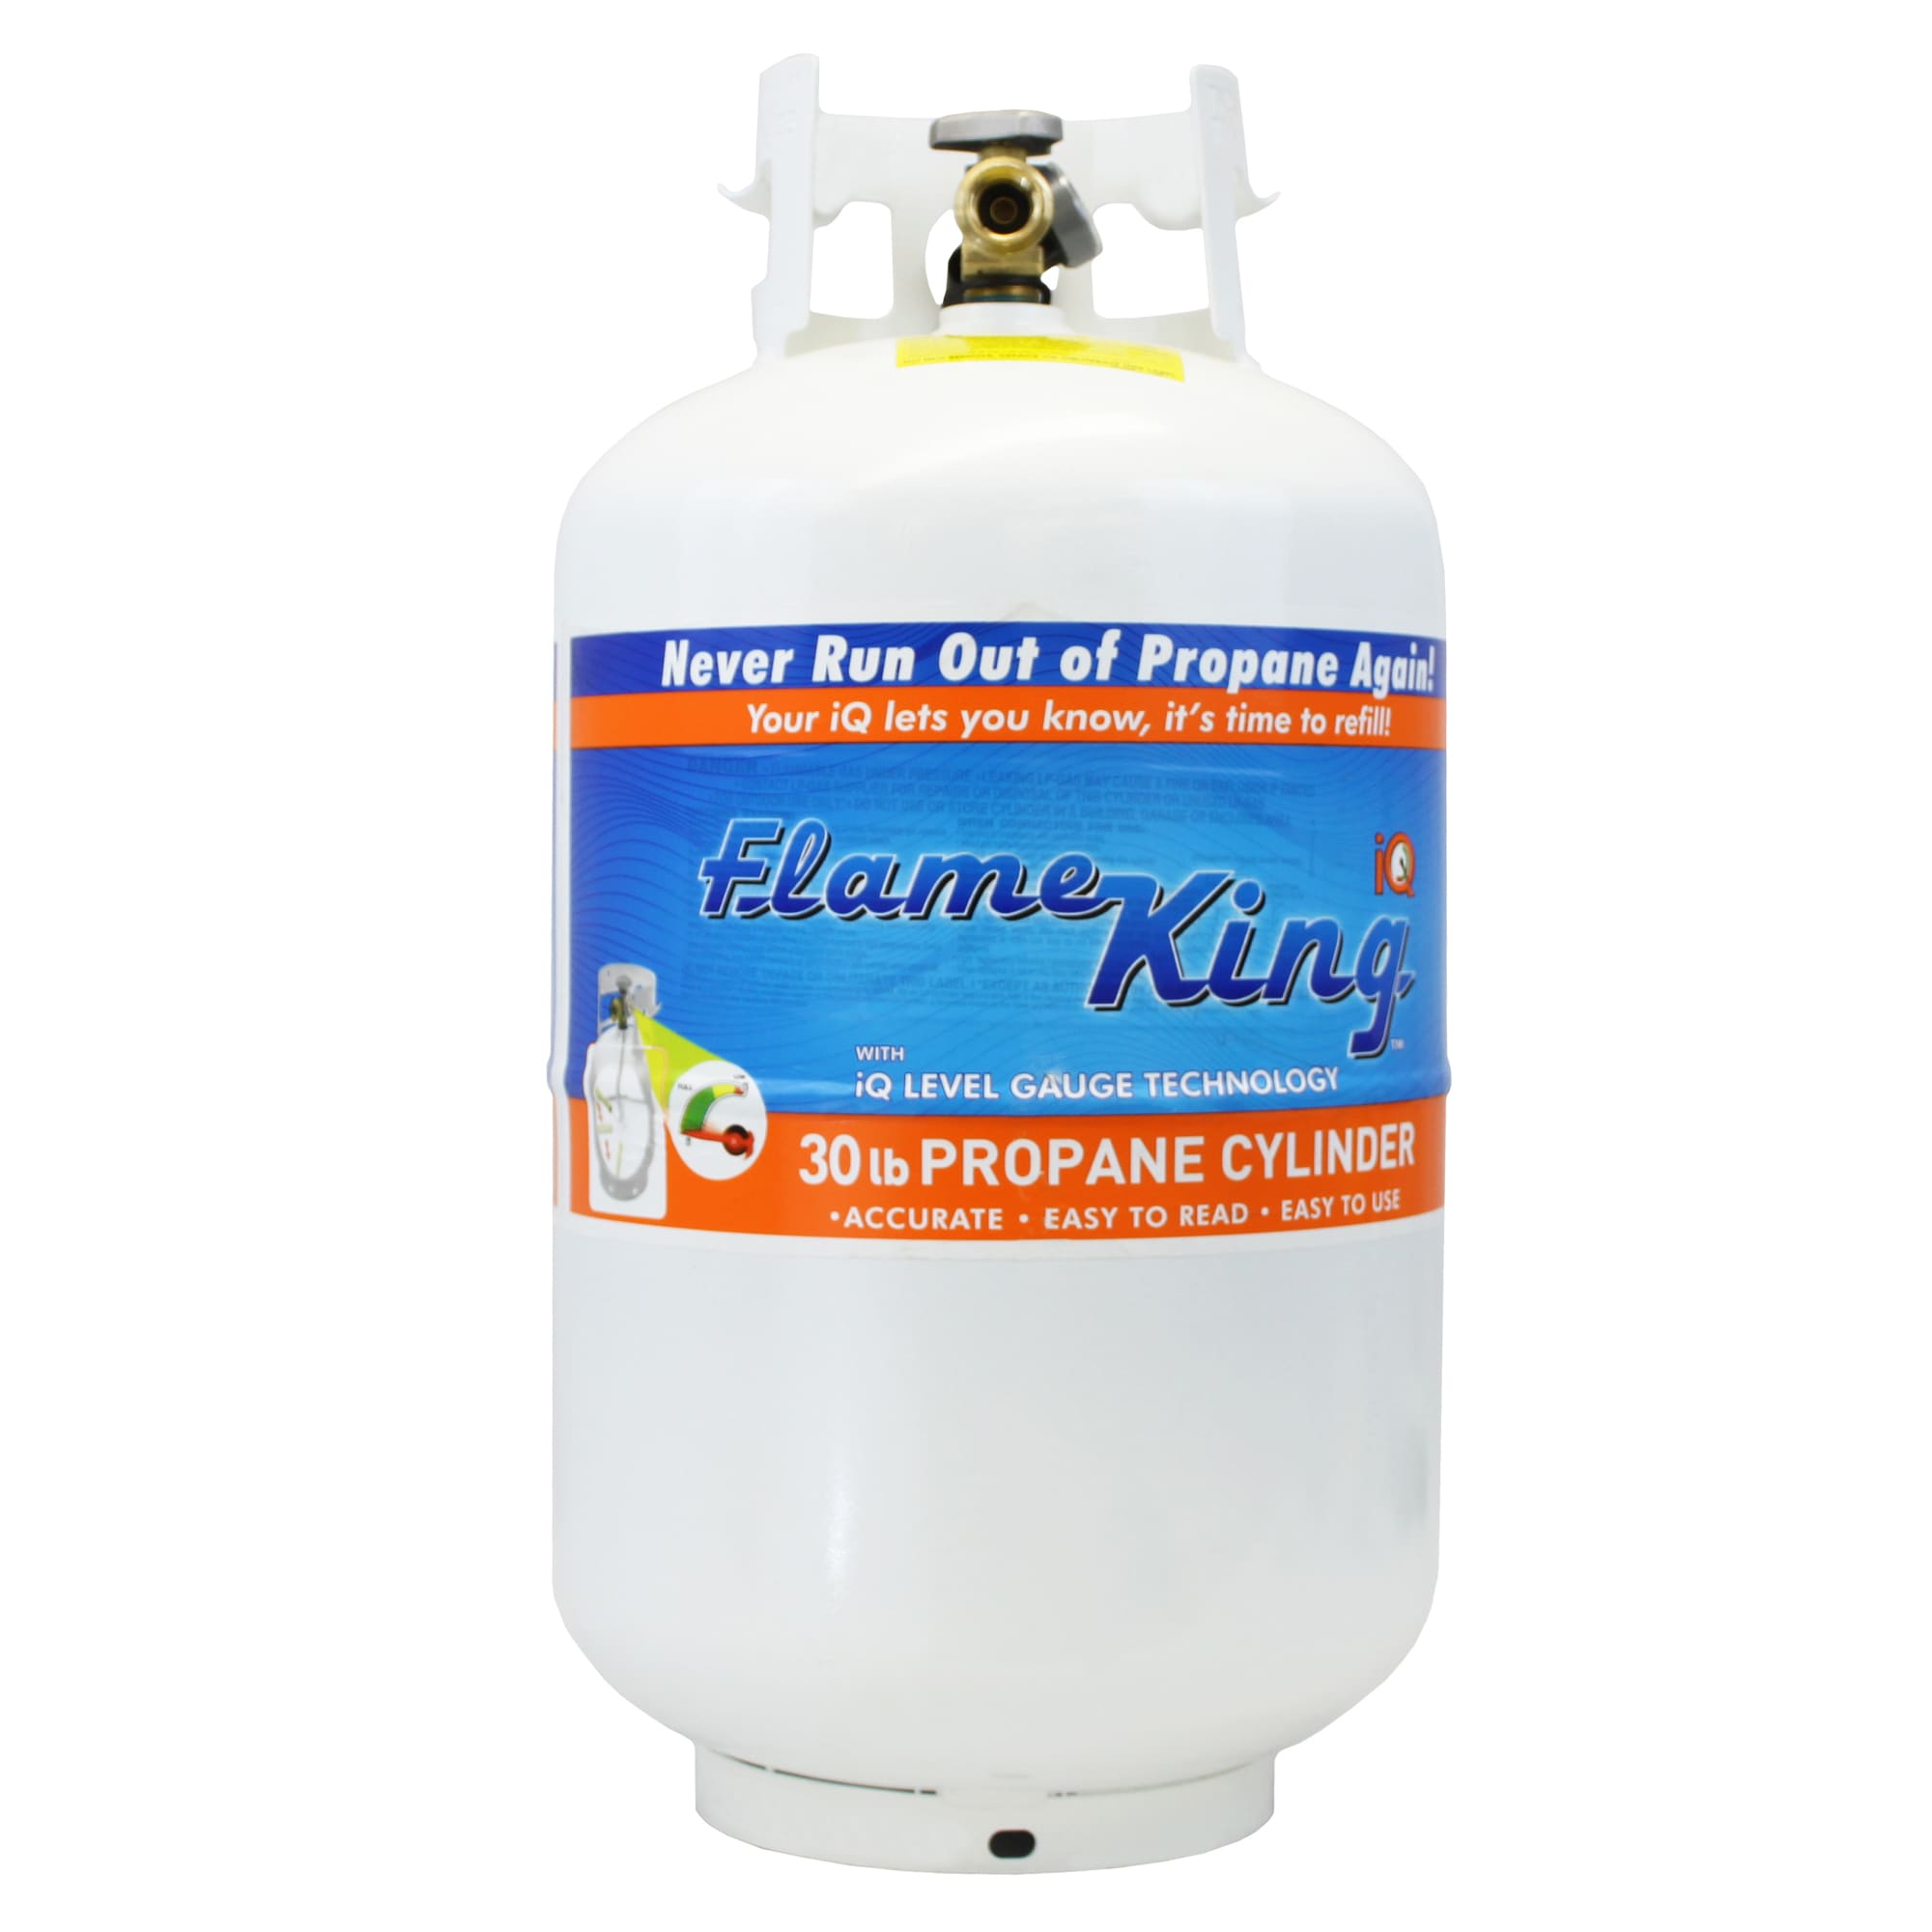  Flame King YSN5LB-GAUGE 5lb Steel Propane Tank Cylinder with  Gauge and OPD Valves for Grills and BBQs, Camping, Fishing, & Outdoor  Activities, White : Patio, Lawn & Garden